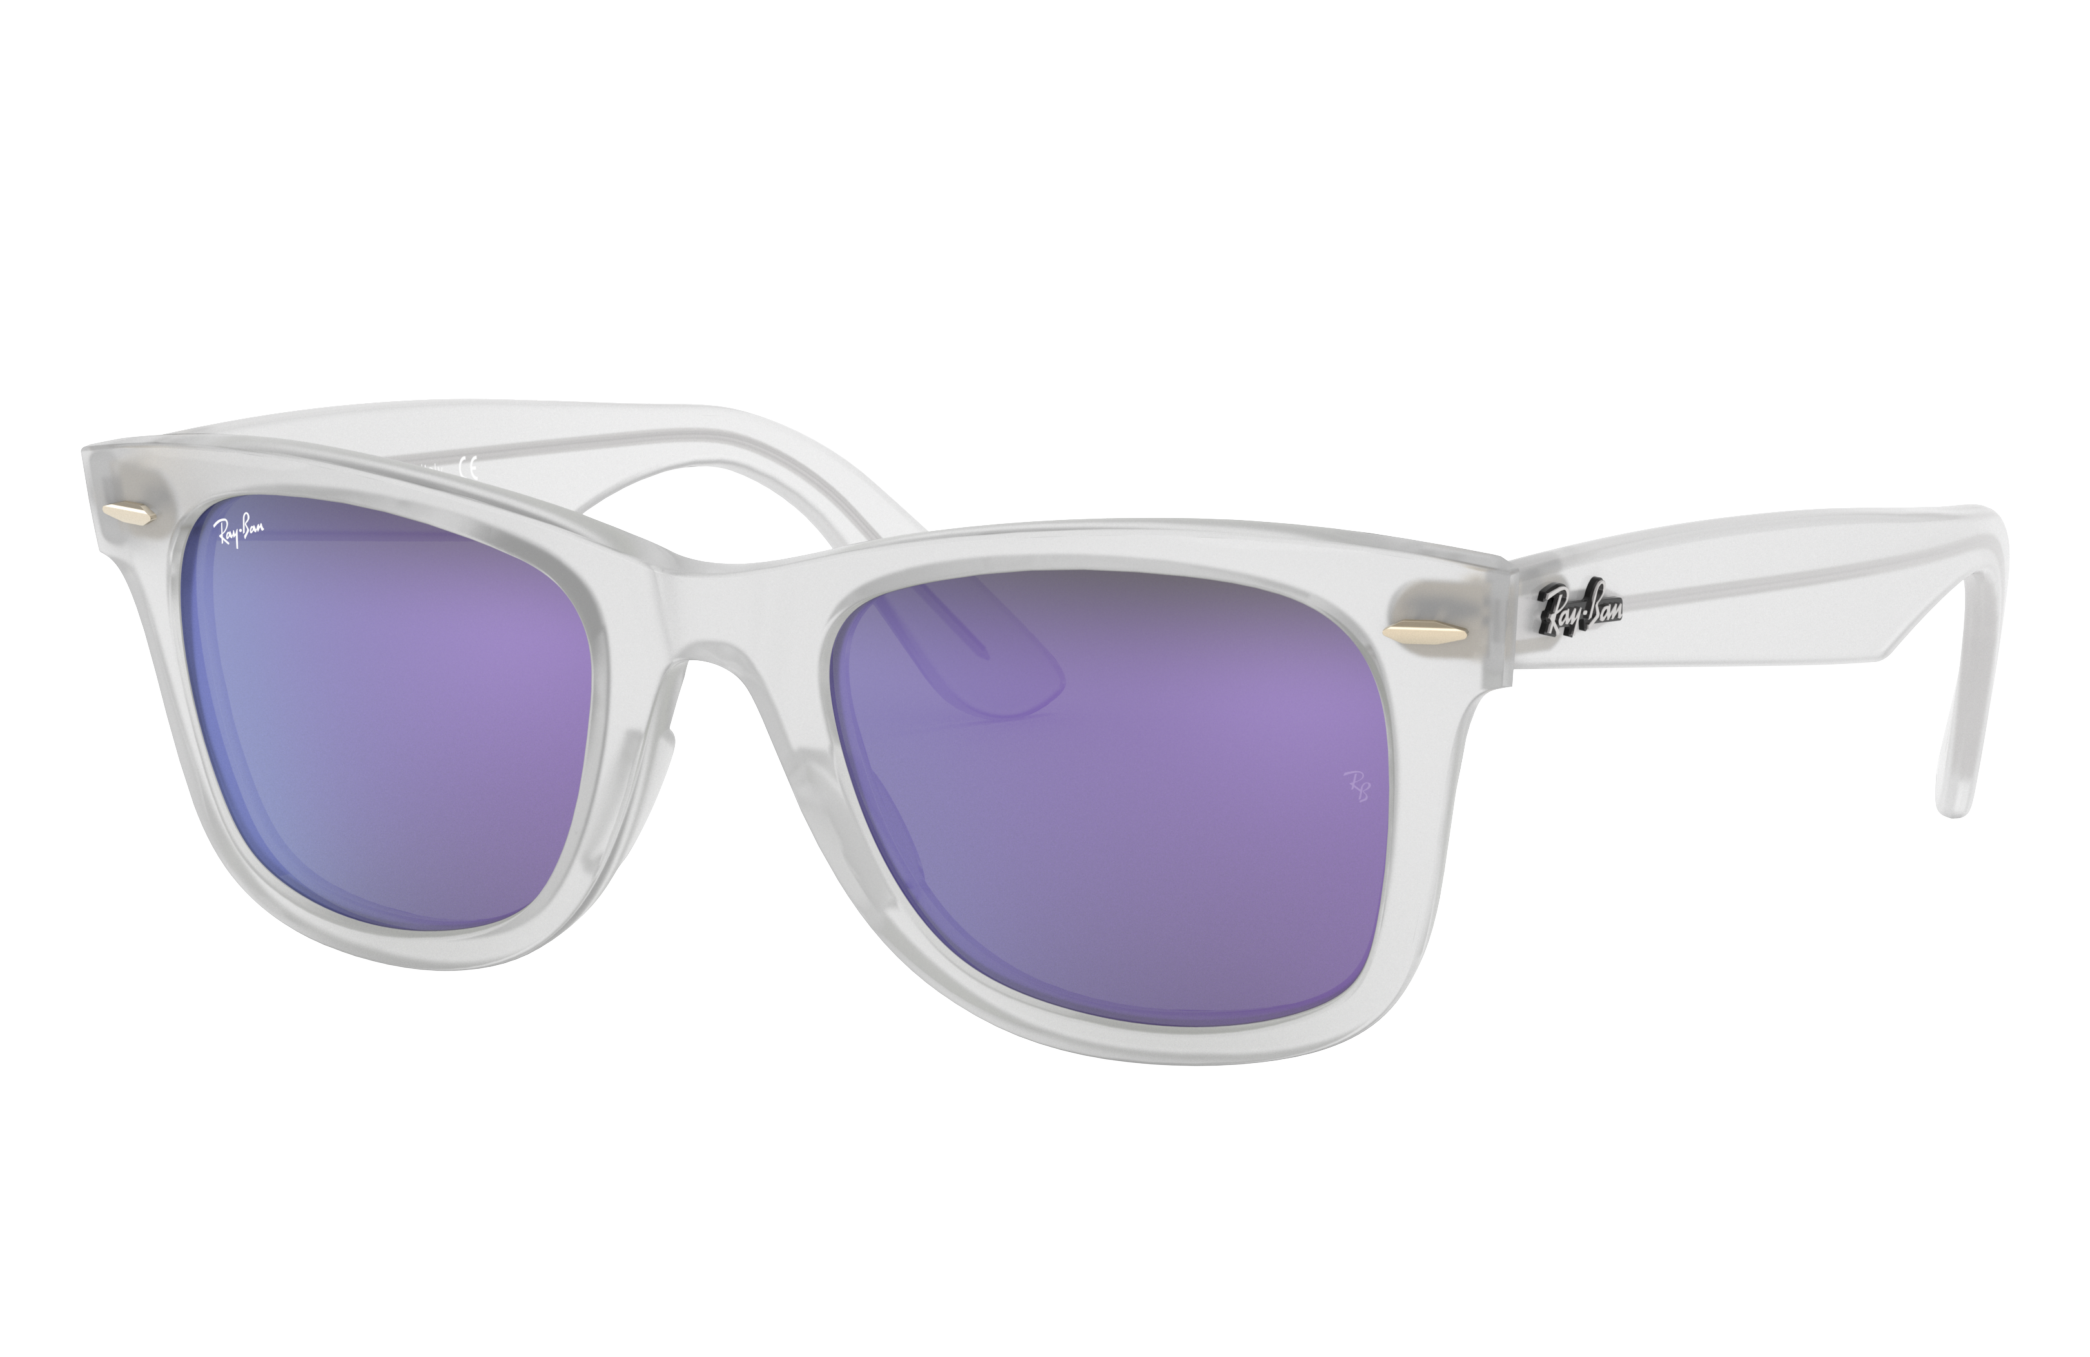 Top 111+ imagen ray ban clear frame - Abzlocal.mx